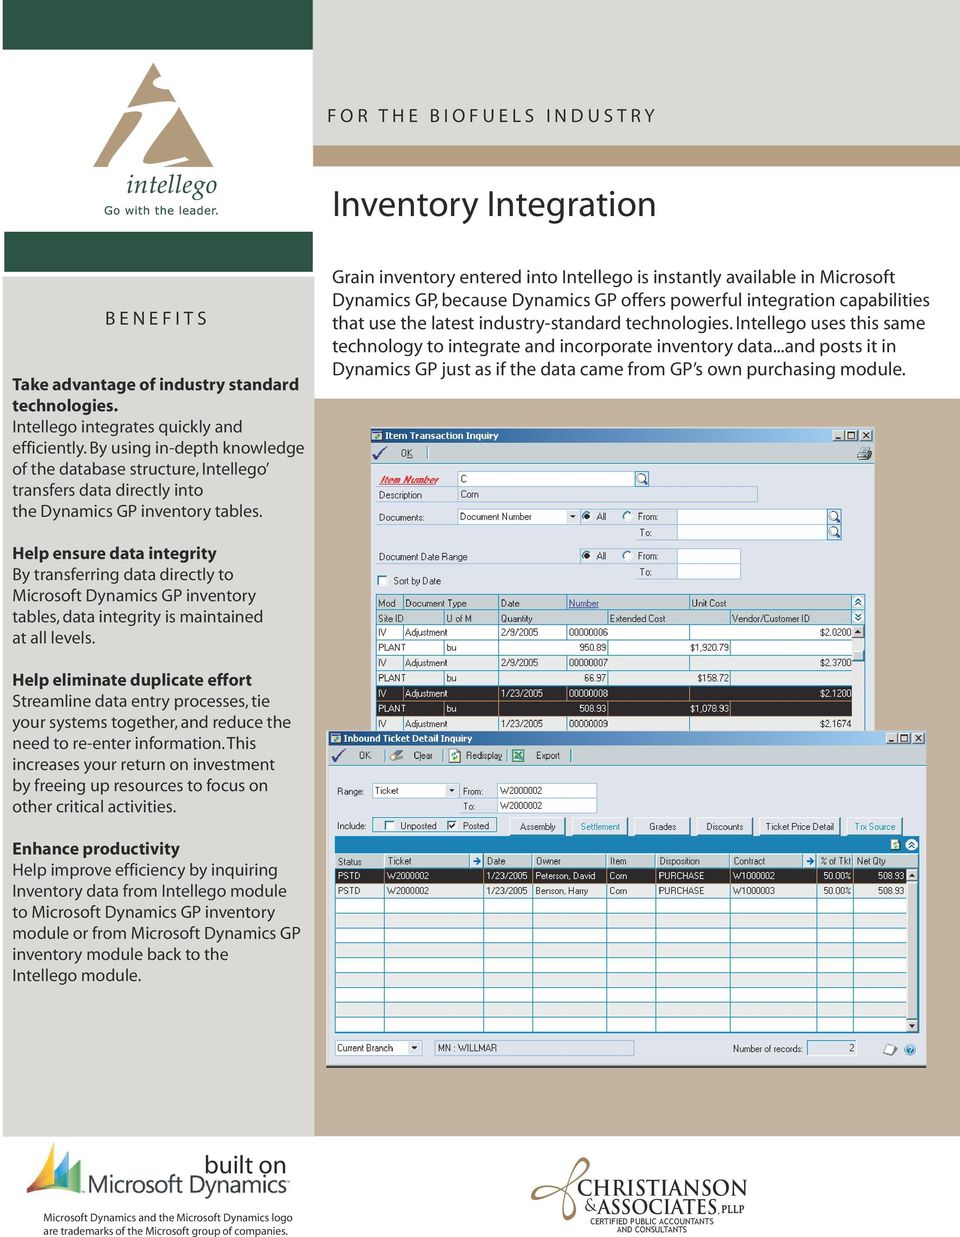 Grain inventory entered into Intellego is instantly available in Microsoft Dynamics GP, because Dynamics GP offers powerful integration capabilities that use the latest industry-standard technologies.